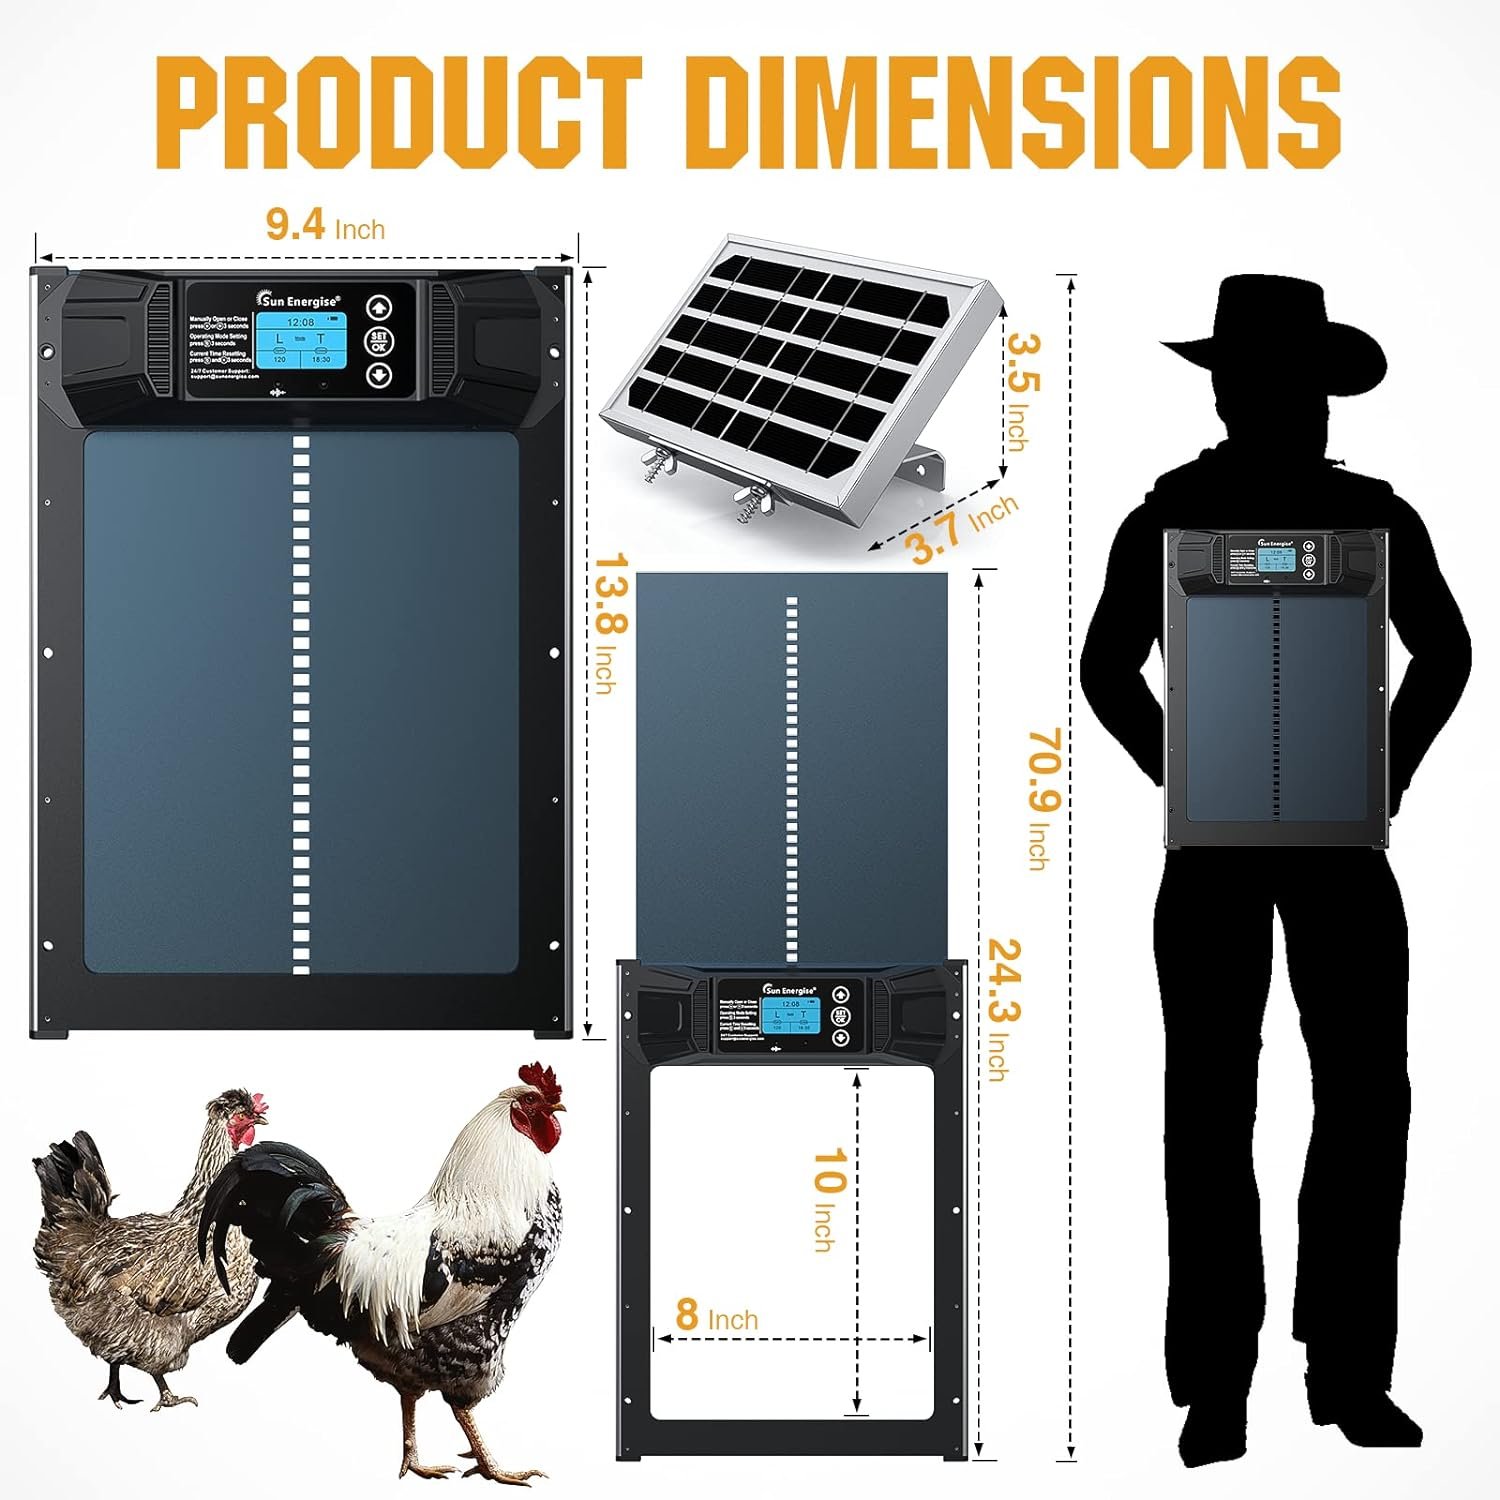 Sun Energise Automatic Chicken Coop Door Opener with Timer  Light Sensor, Auto Chicken Coop Door with Large LCD Display, Anti-Pinch Design for Chicken House Farms